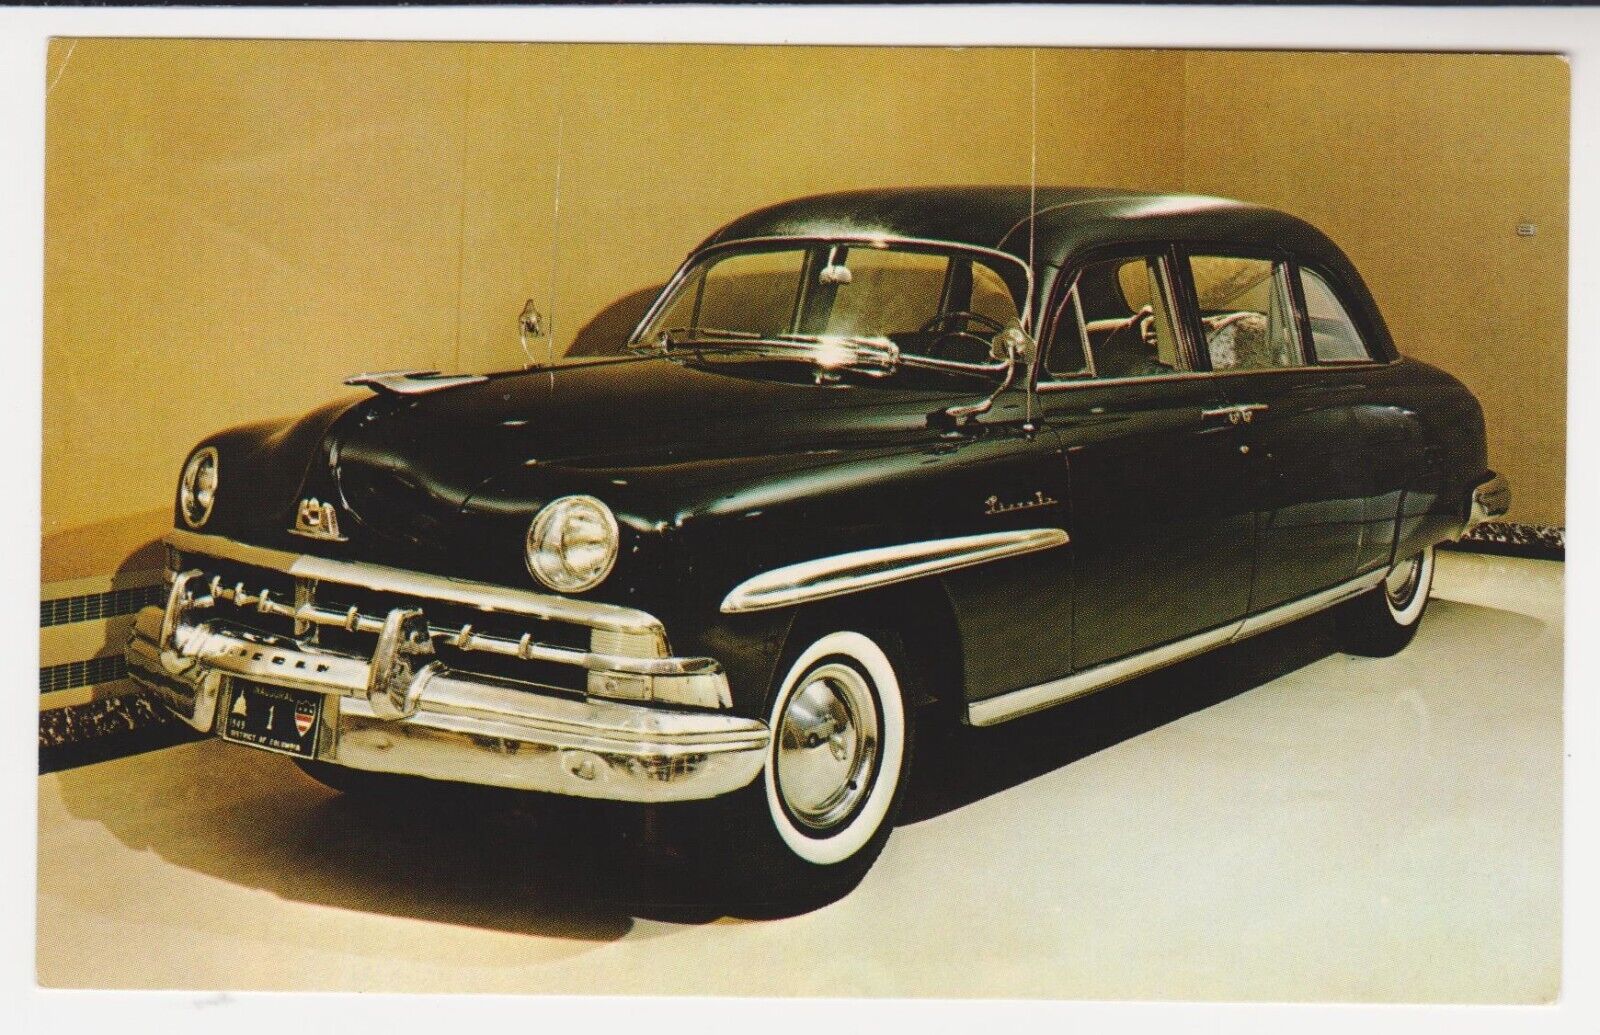 HARRY S. TRUMAN LIBRARY AND MUSEUM, INDEPENDENCE, MO. - 1950 LINCOLN LIMOUSINE